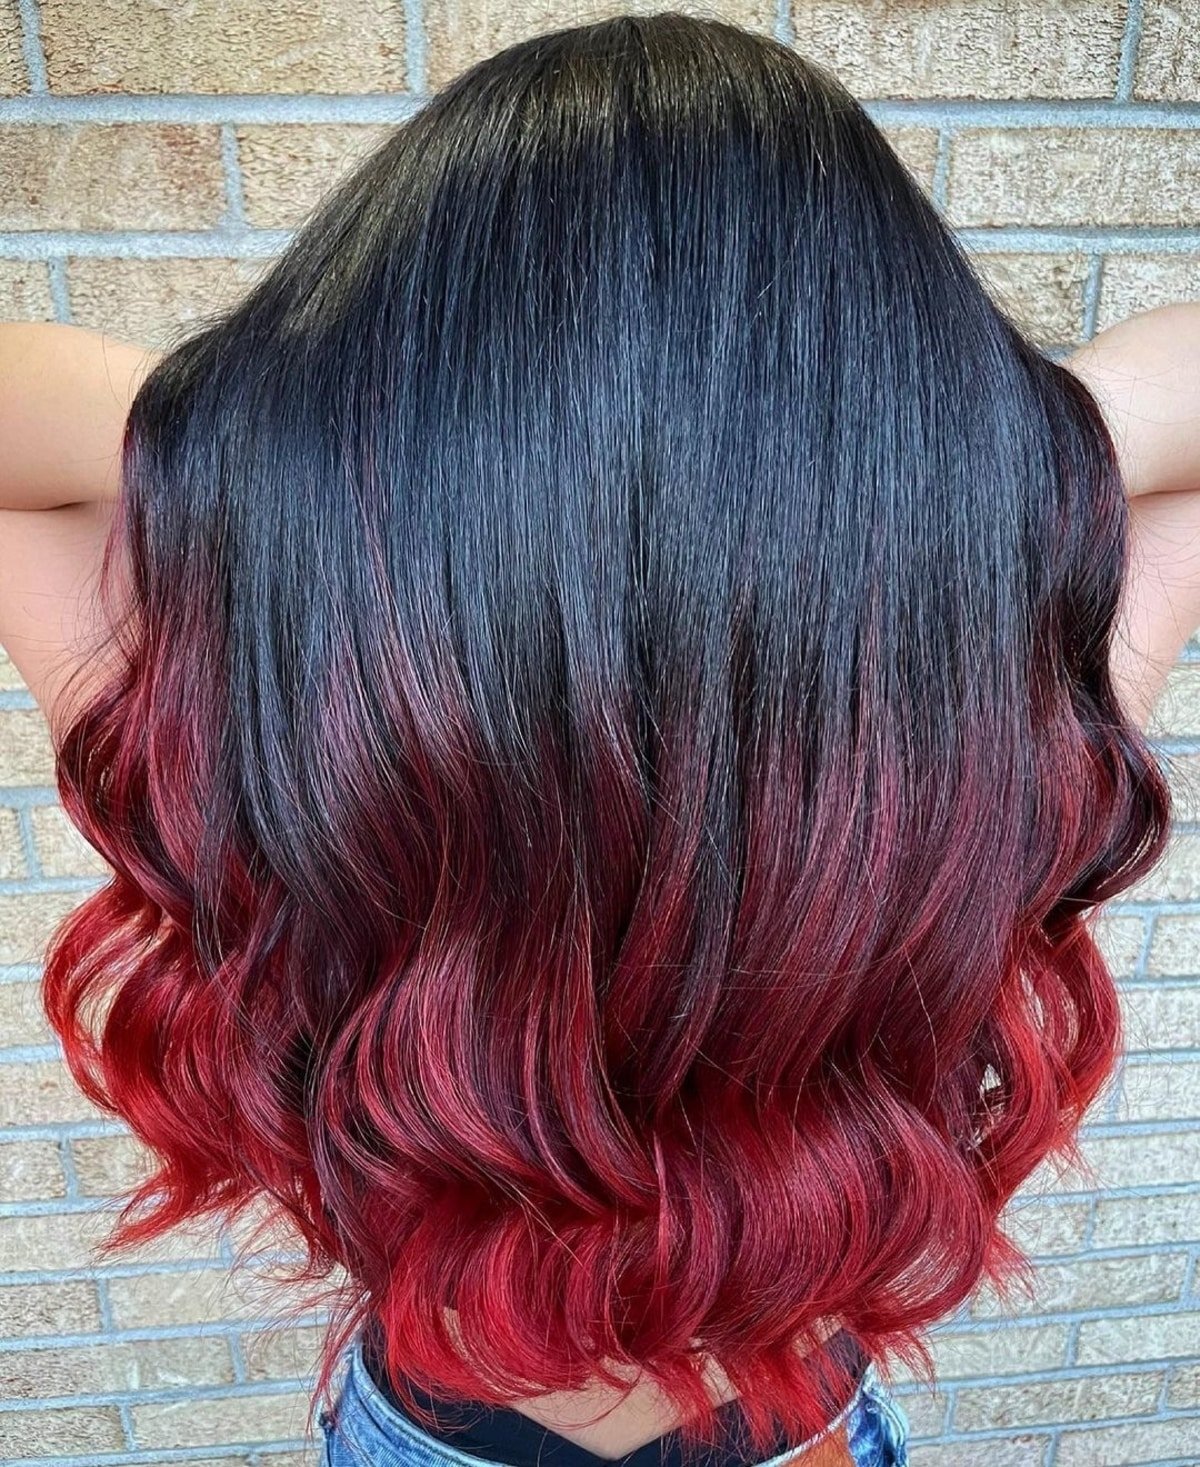 19 Best Black Hair with Red Highlights for Eye-Catching Contrast